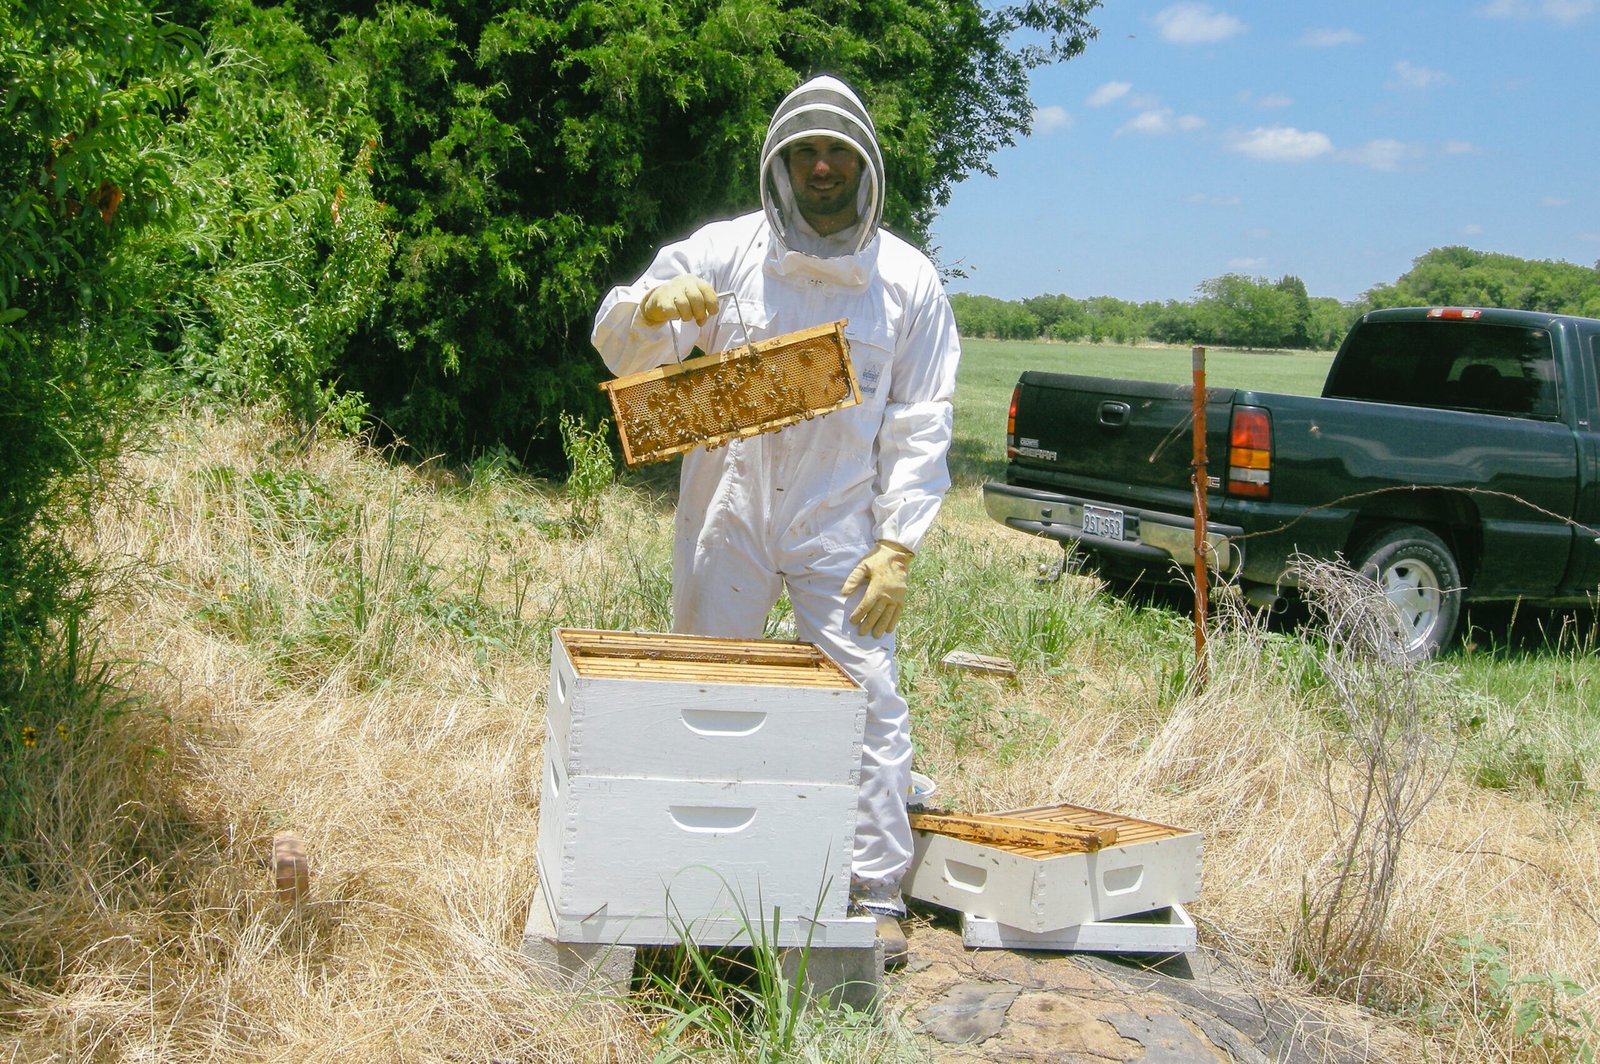 The Legalities of Beekeeping in National Parks